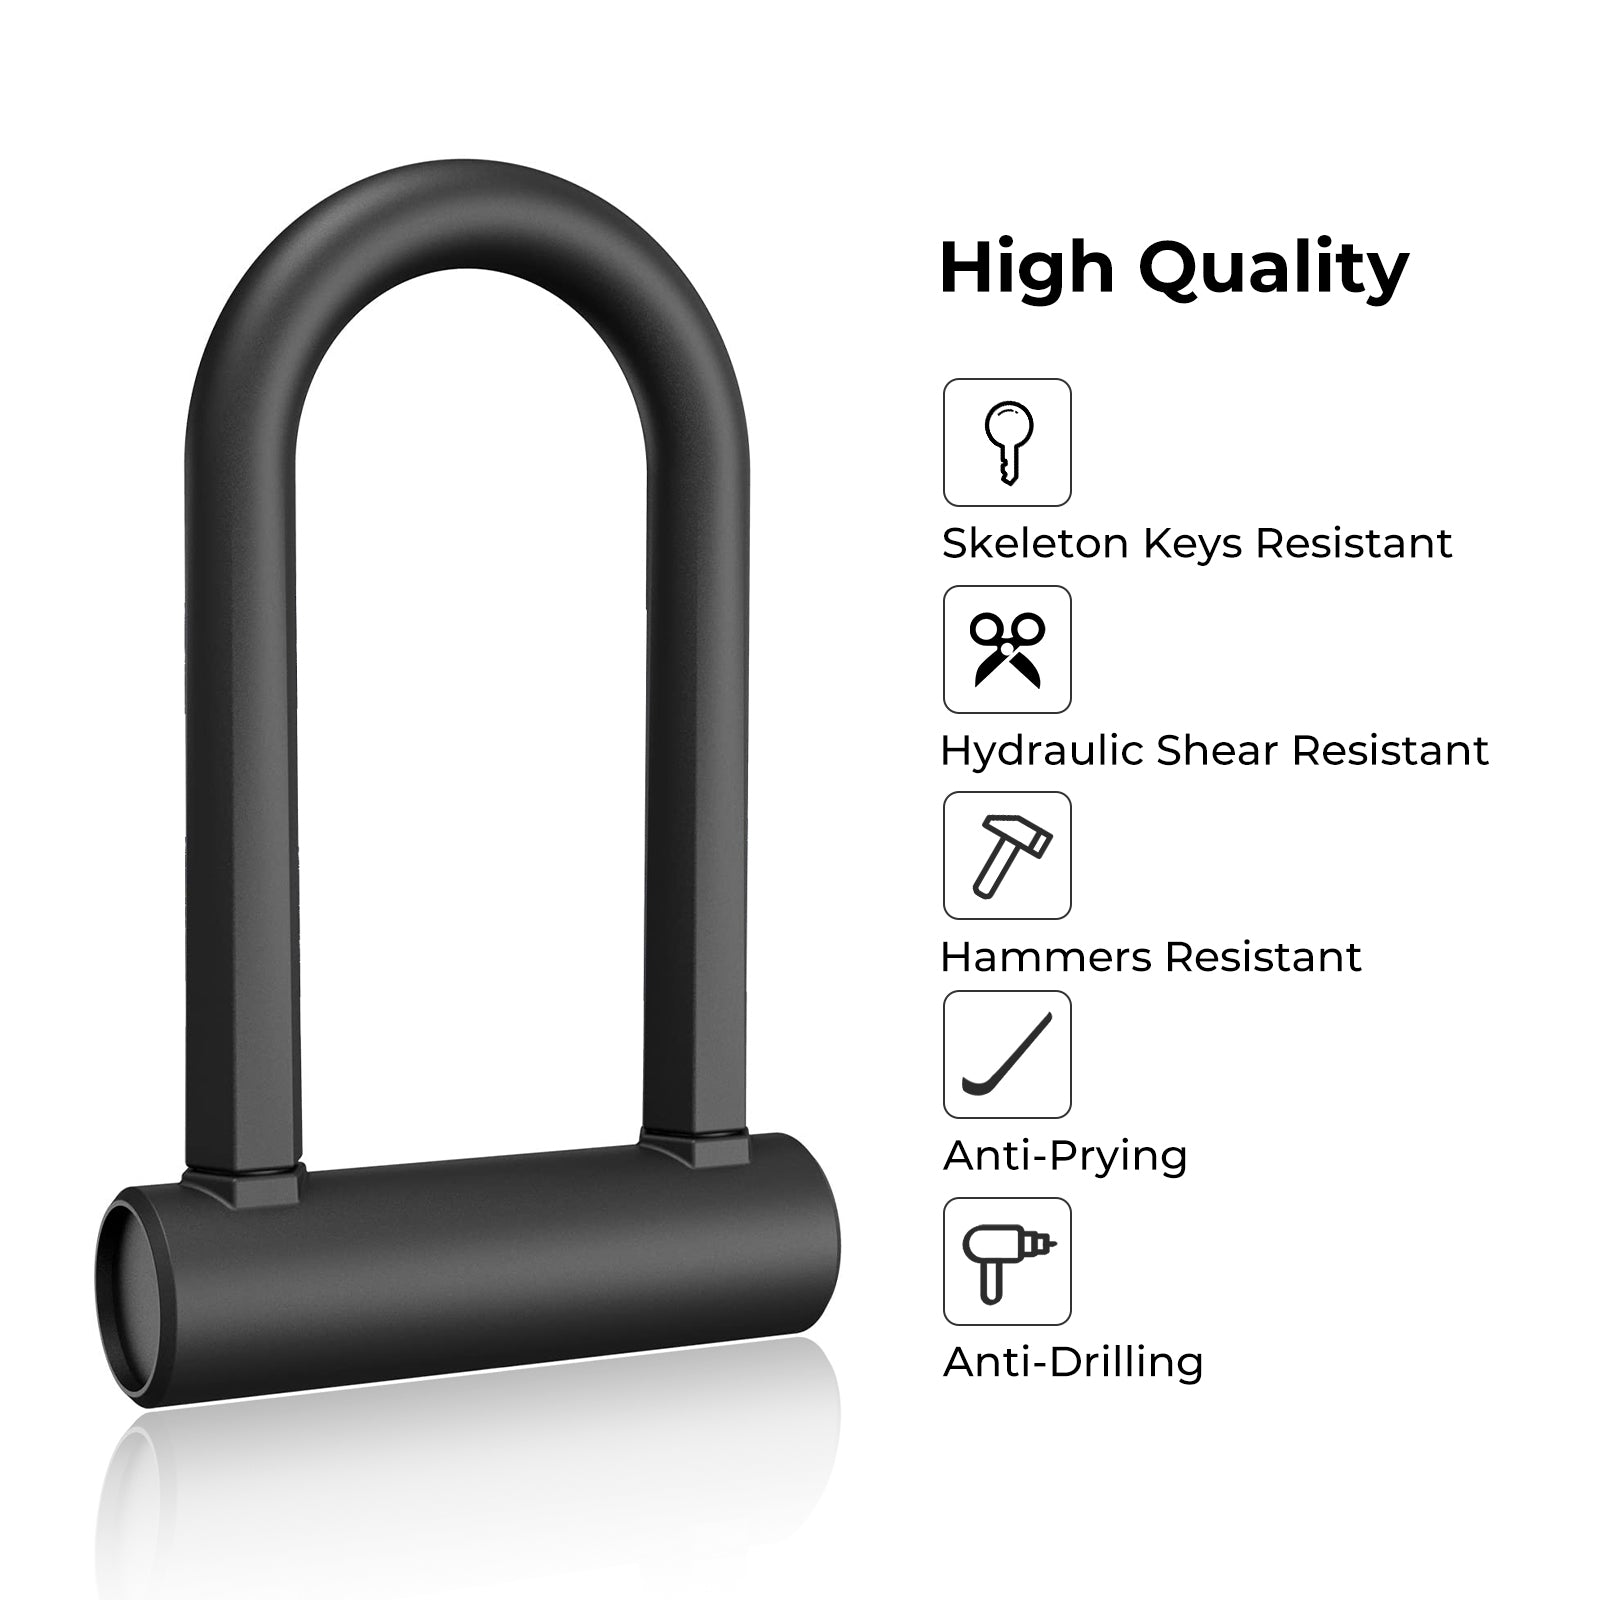 Heavy Duty U Lock, D Lock, Bicycle Lock, Electric Scooter Lock, Motorcycle,  Swiss Engineered Lock, 13mm Steel Anti-Theft Design with Silicone Outer